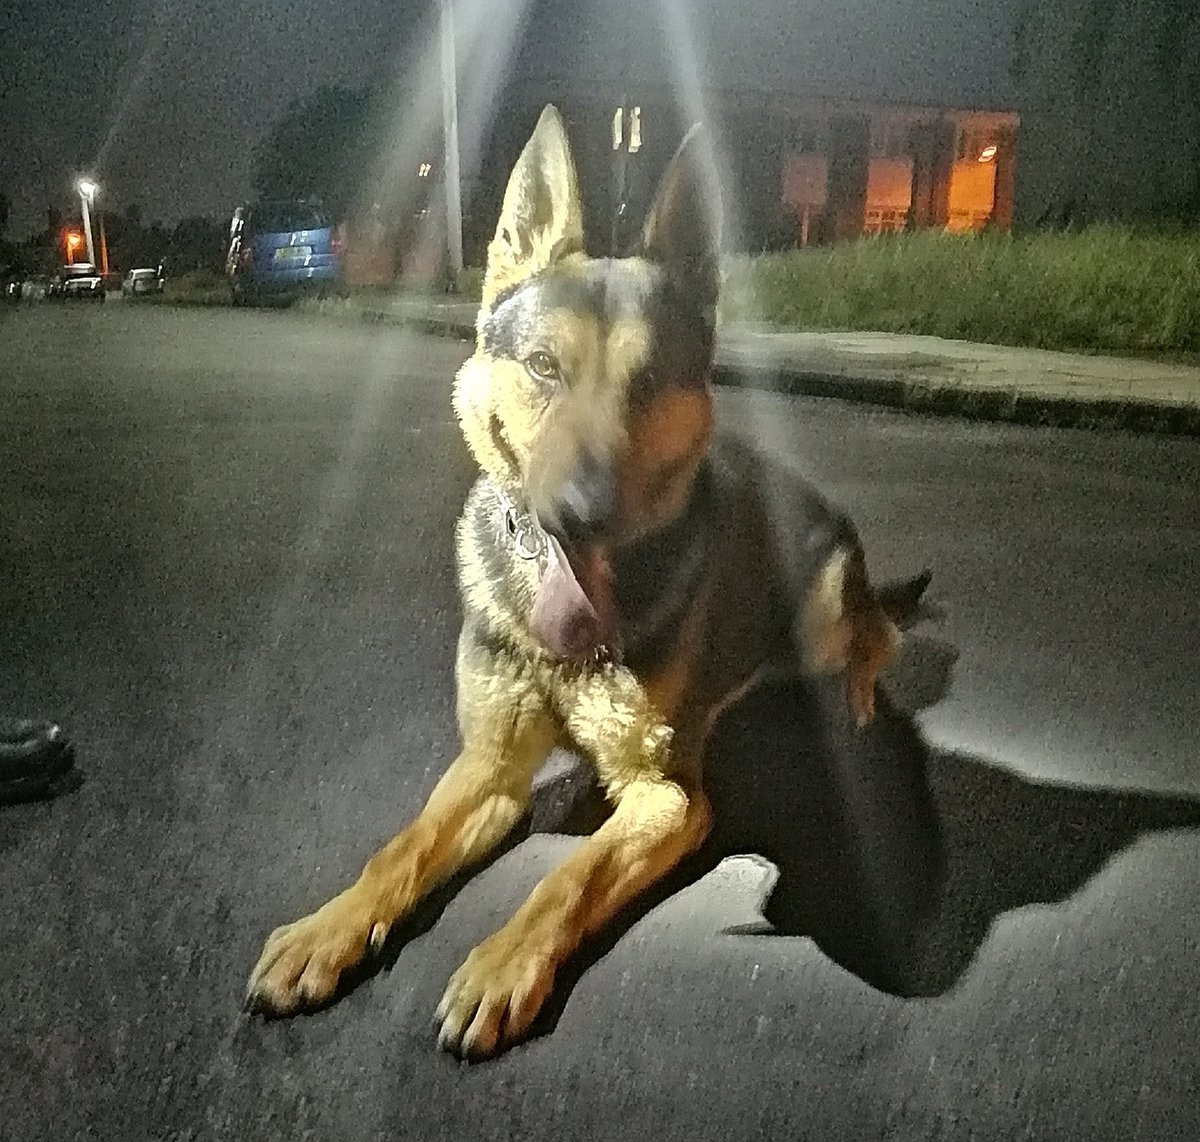 Stechford A Unit officers who attended a burglary in progress had PD Gunner locate the broken lock & handle but the offender(s) were sadly no where to be found. #ResponseTakeover